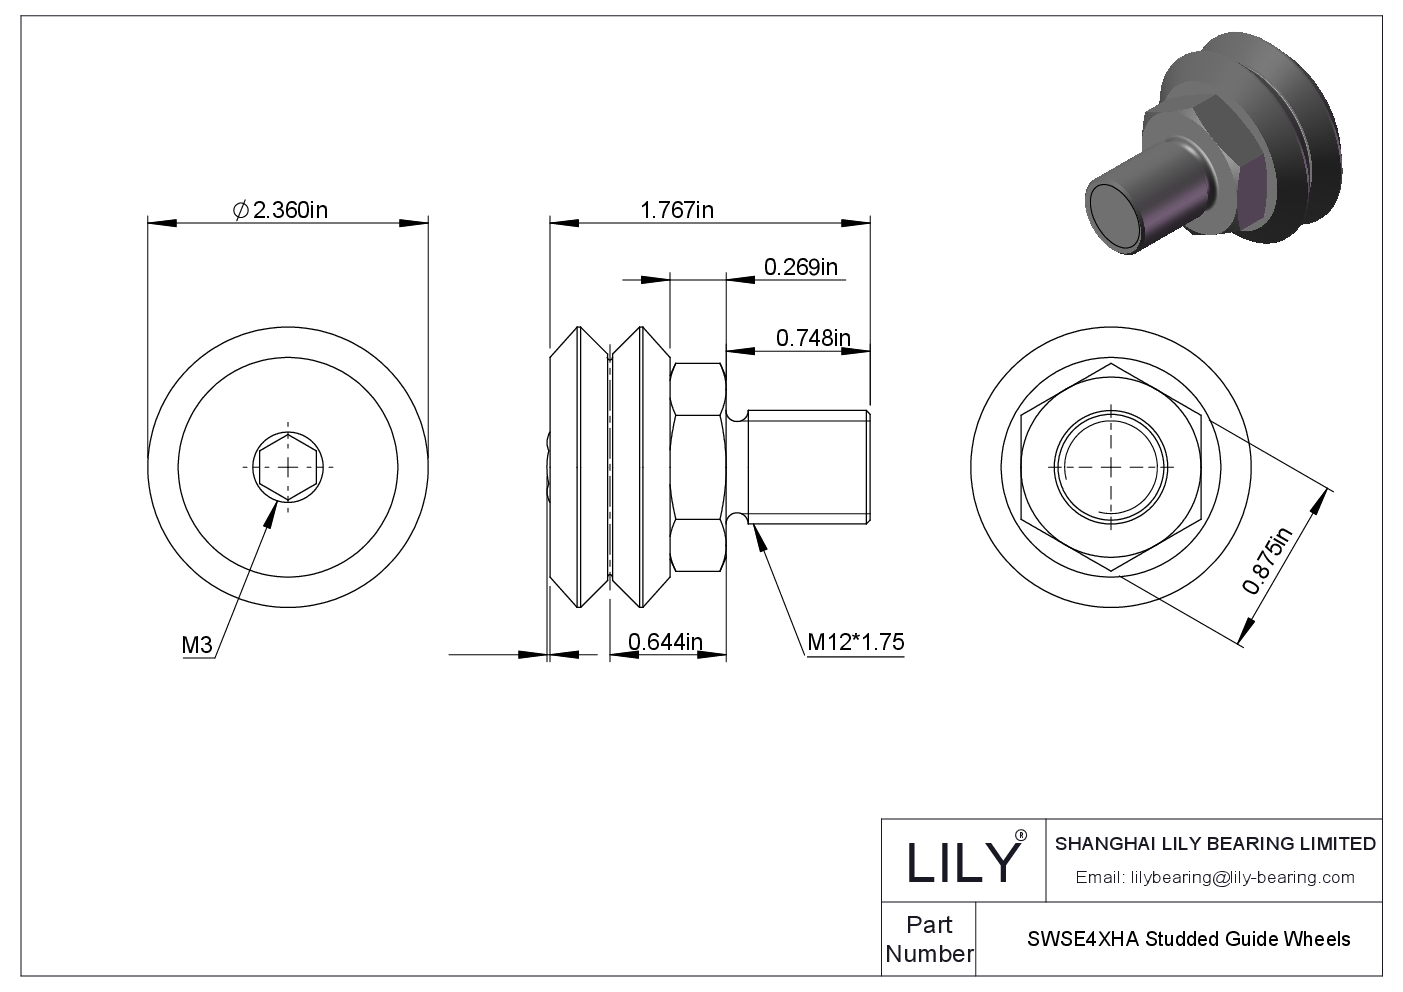 SWSE4XHA Studded Guide Wheels cad drawing